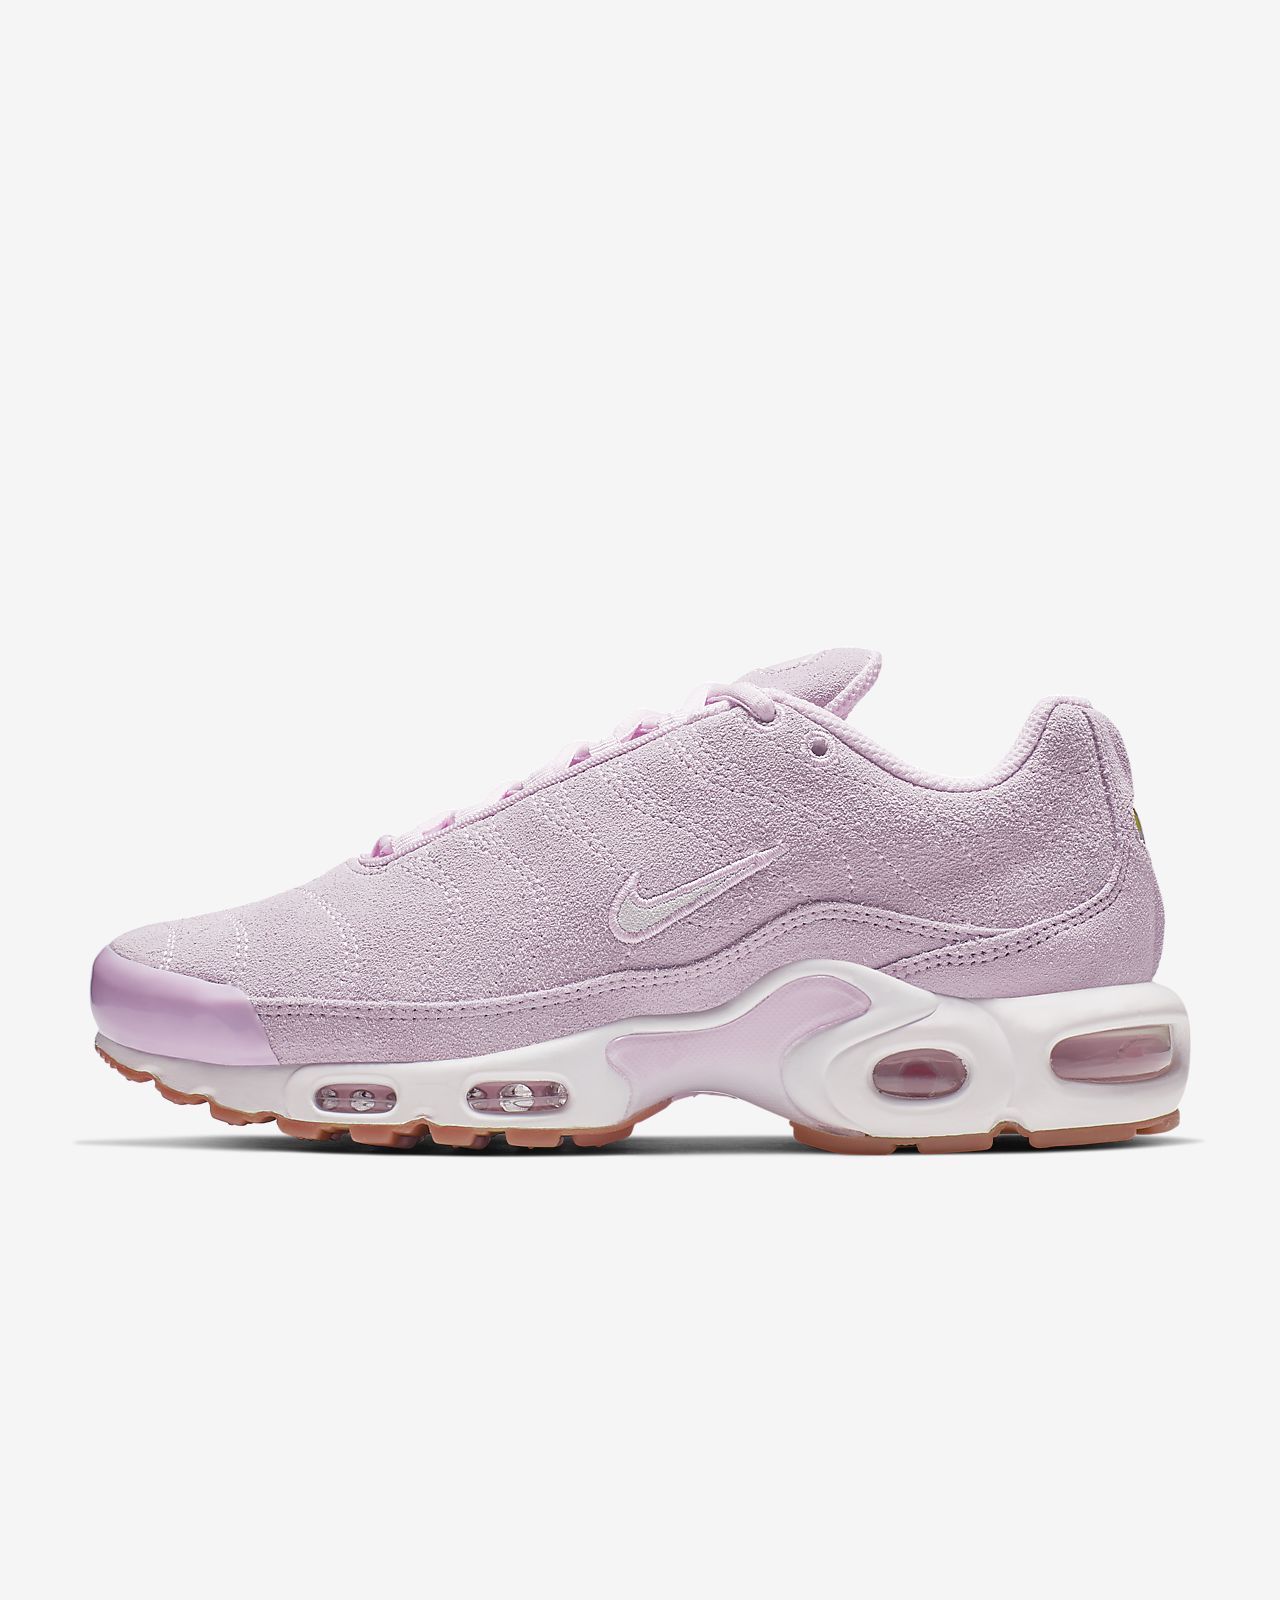 nike air max plus pink and white